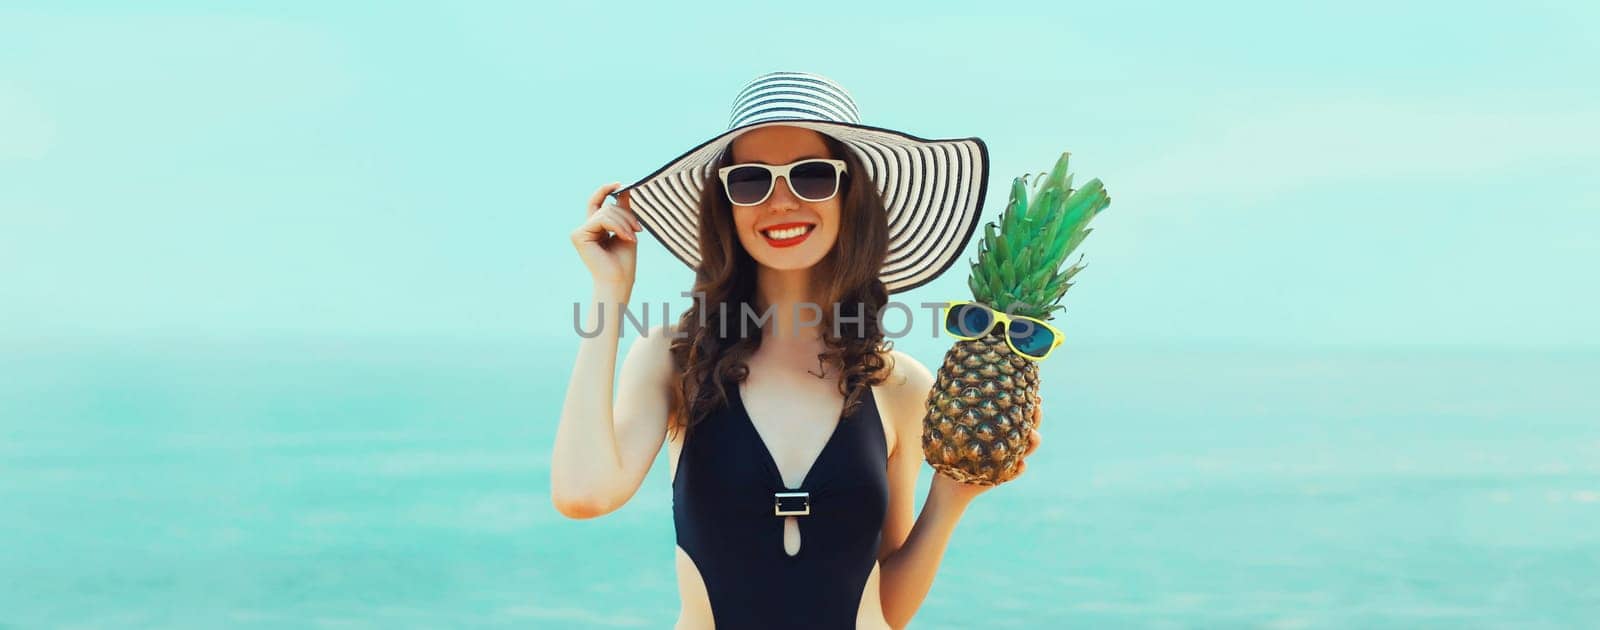 Summer vacation, beautiful happy woman in bikini swimsuit, hat, pineapple fruits on the beach at sea by Rohappy